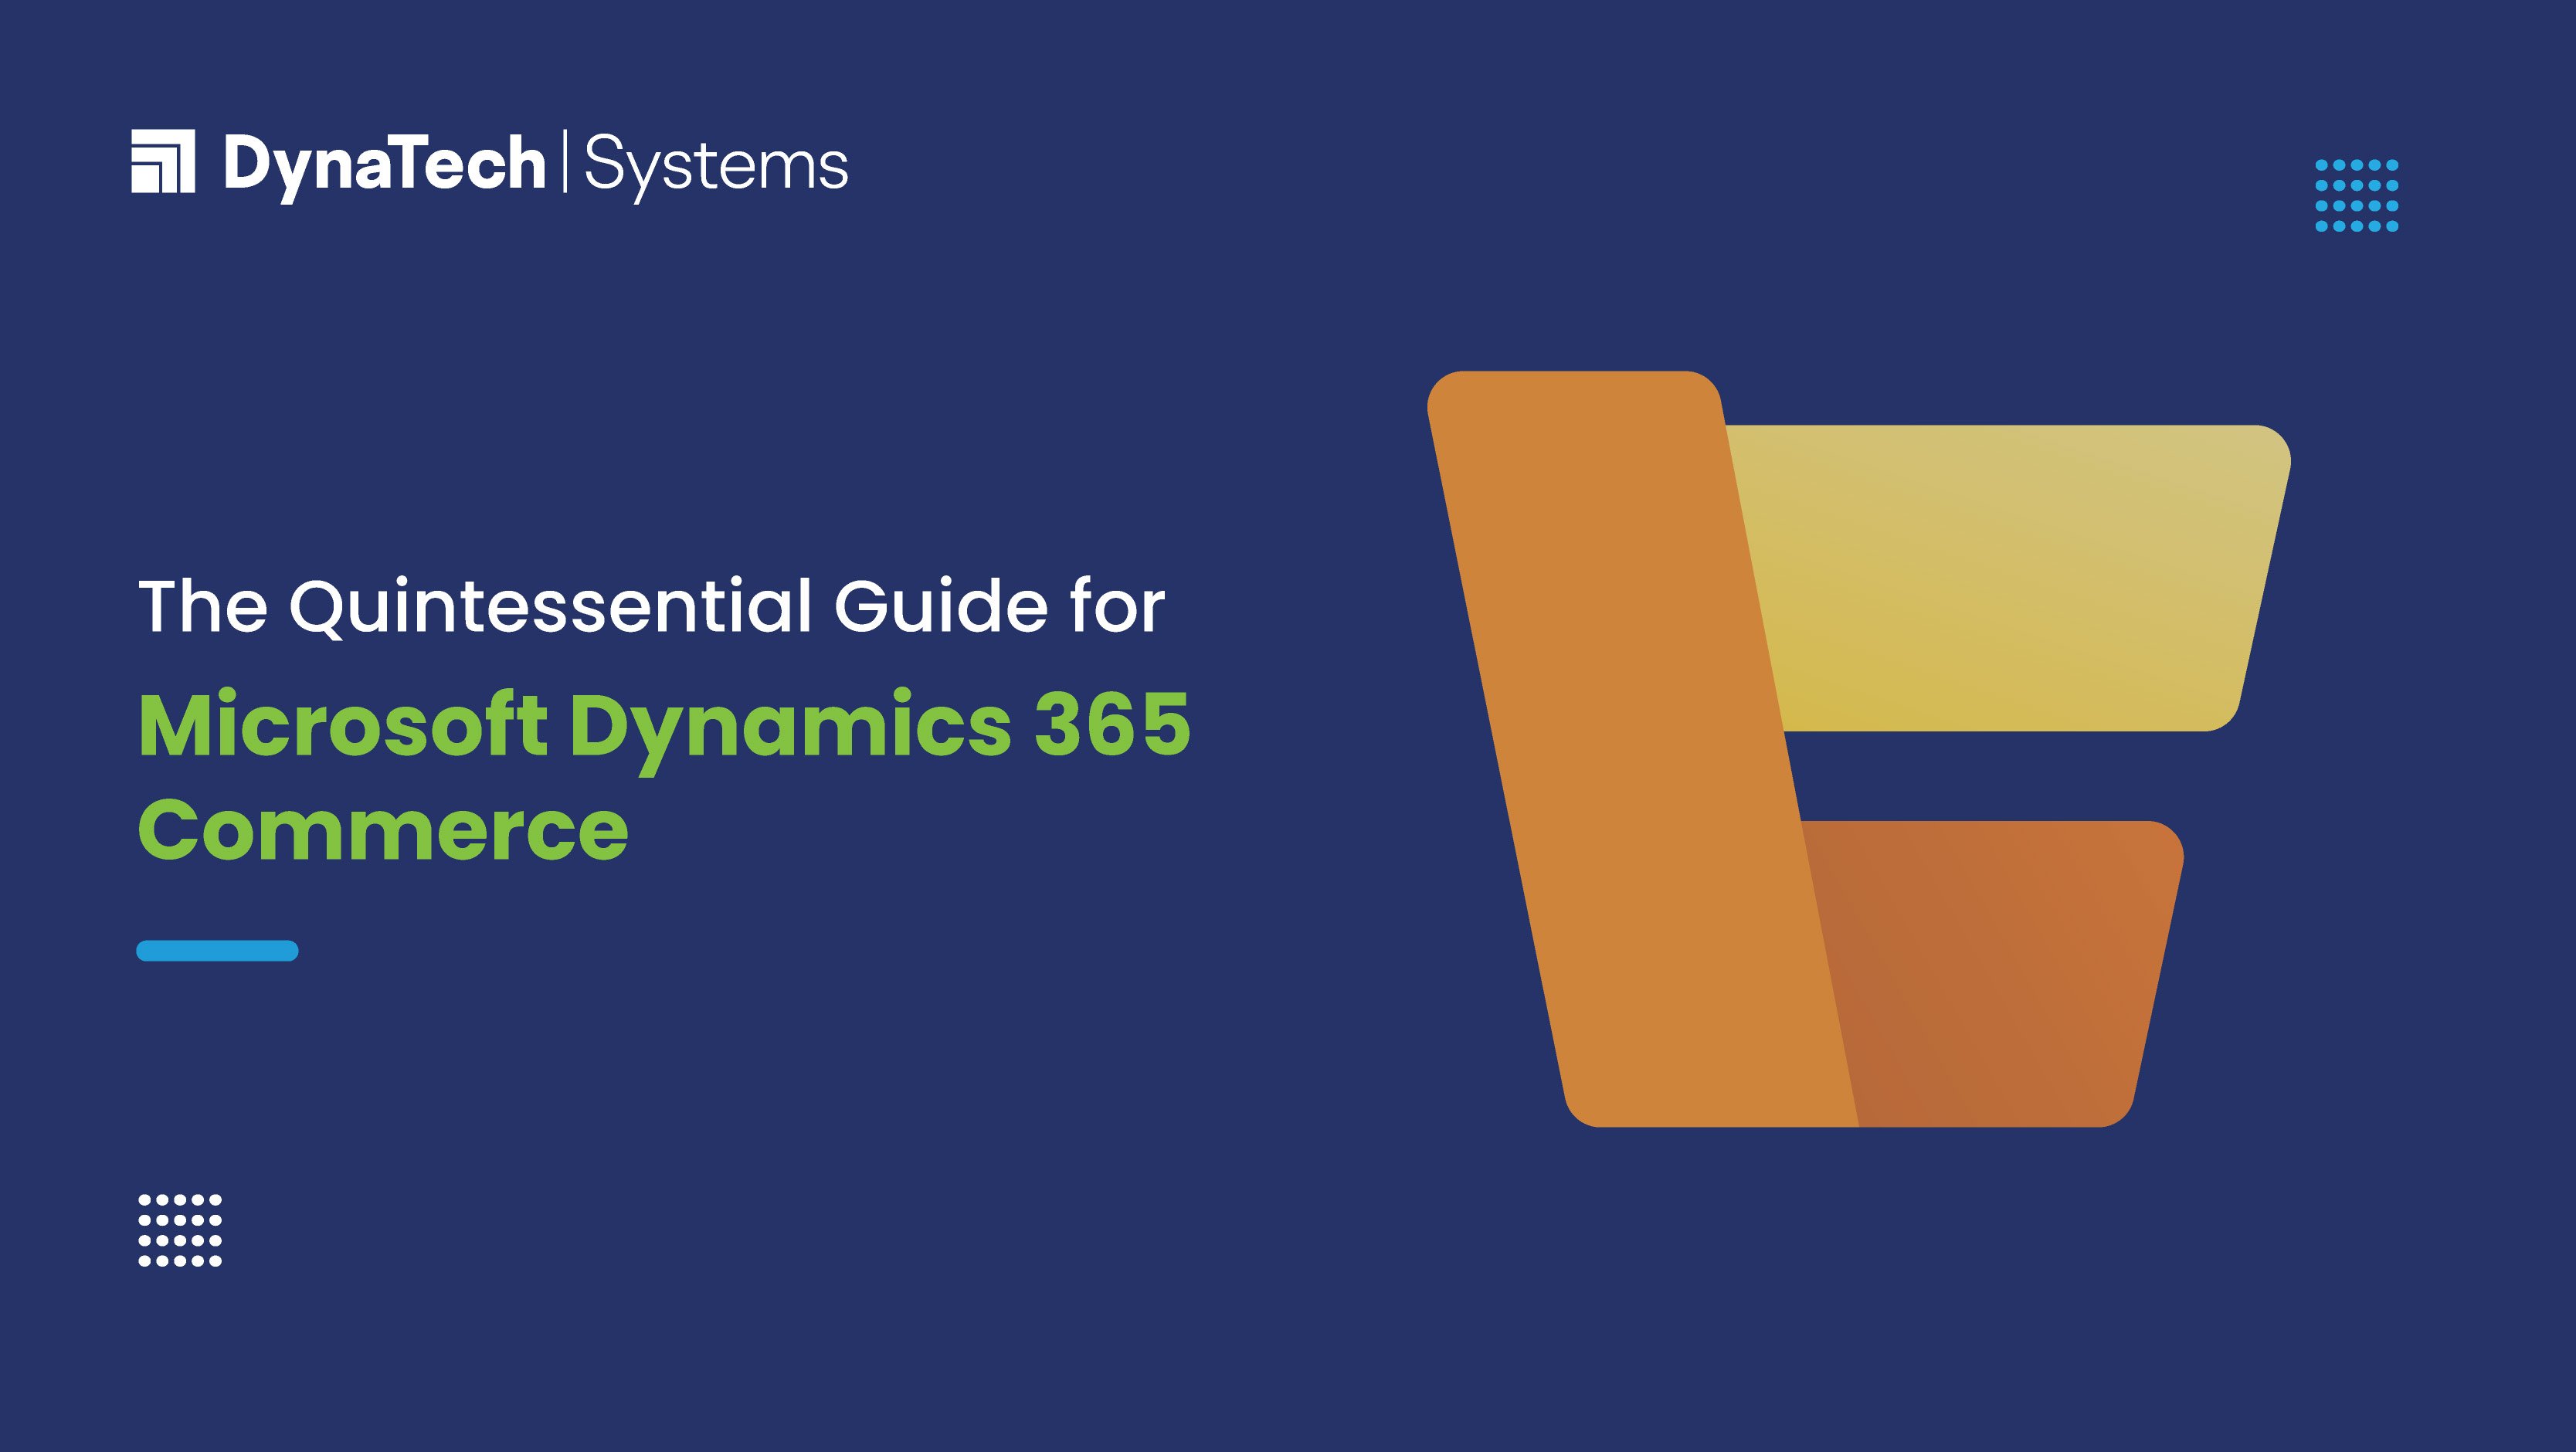 The Quintessential Guide for Microsoft Dynamics 365 Commerce